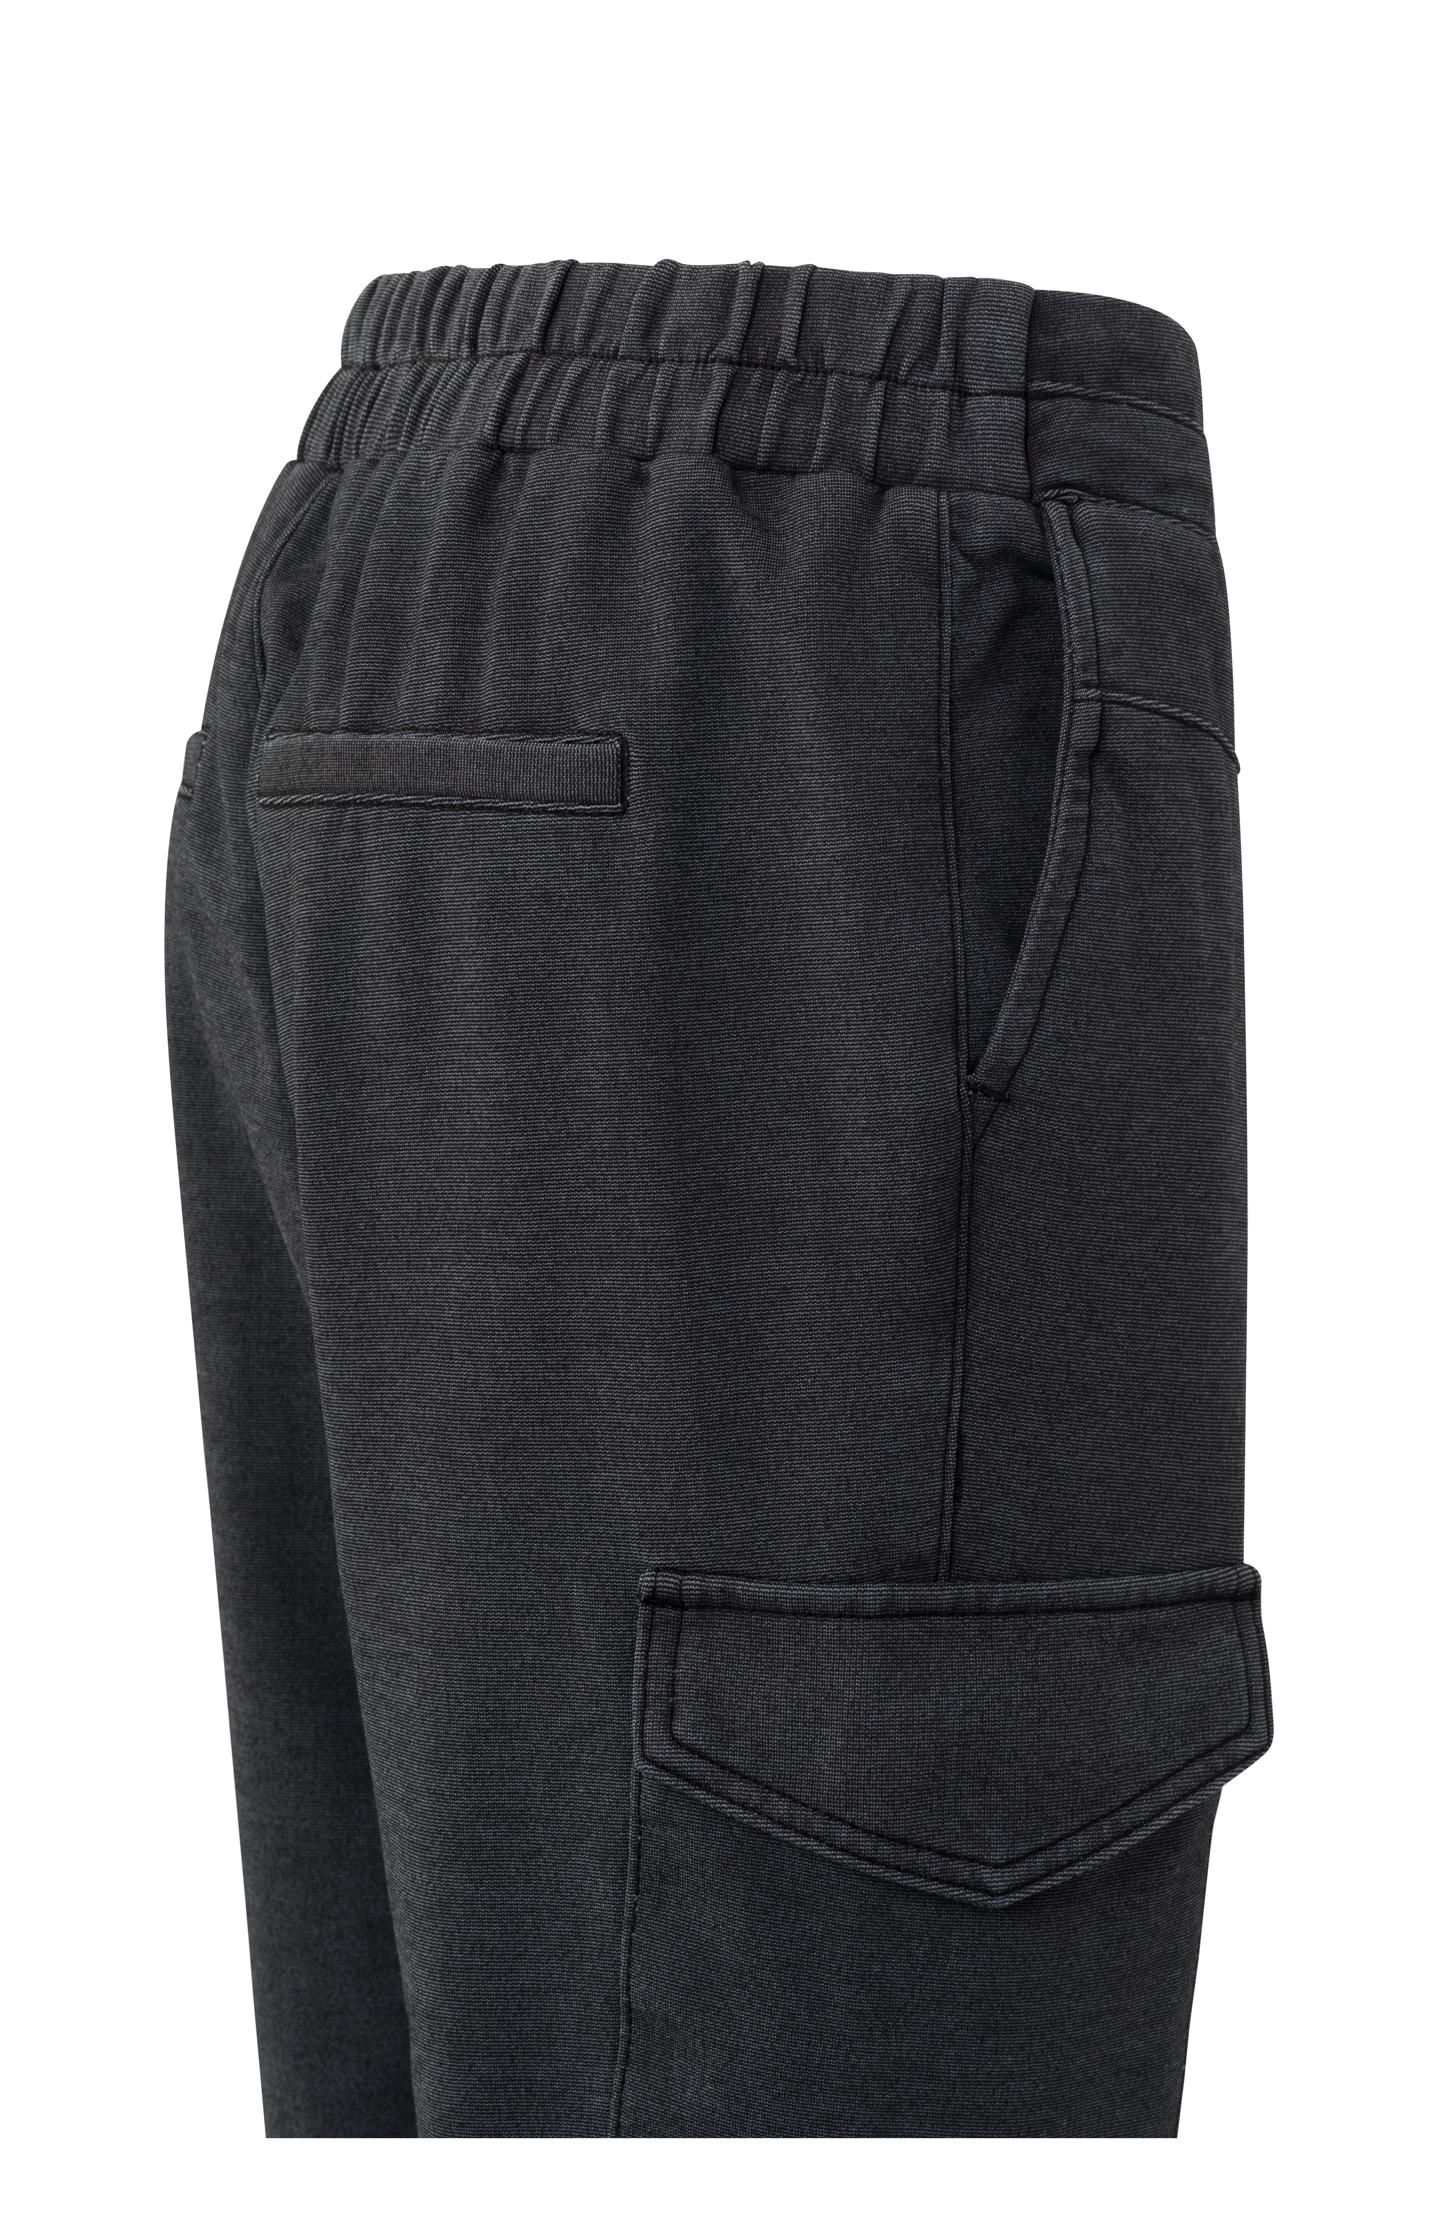 Jersey cargo trousers with drawstring and elastic waist